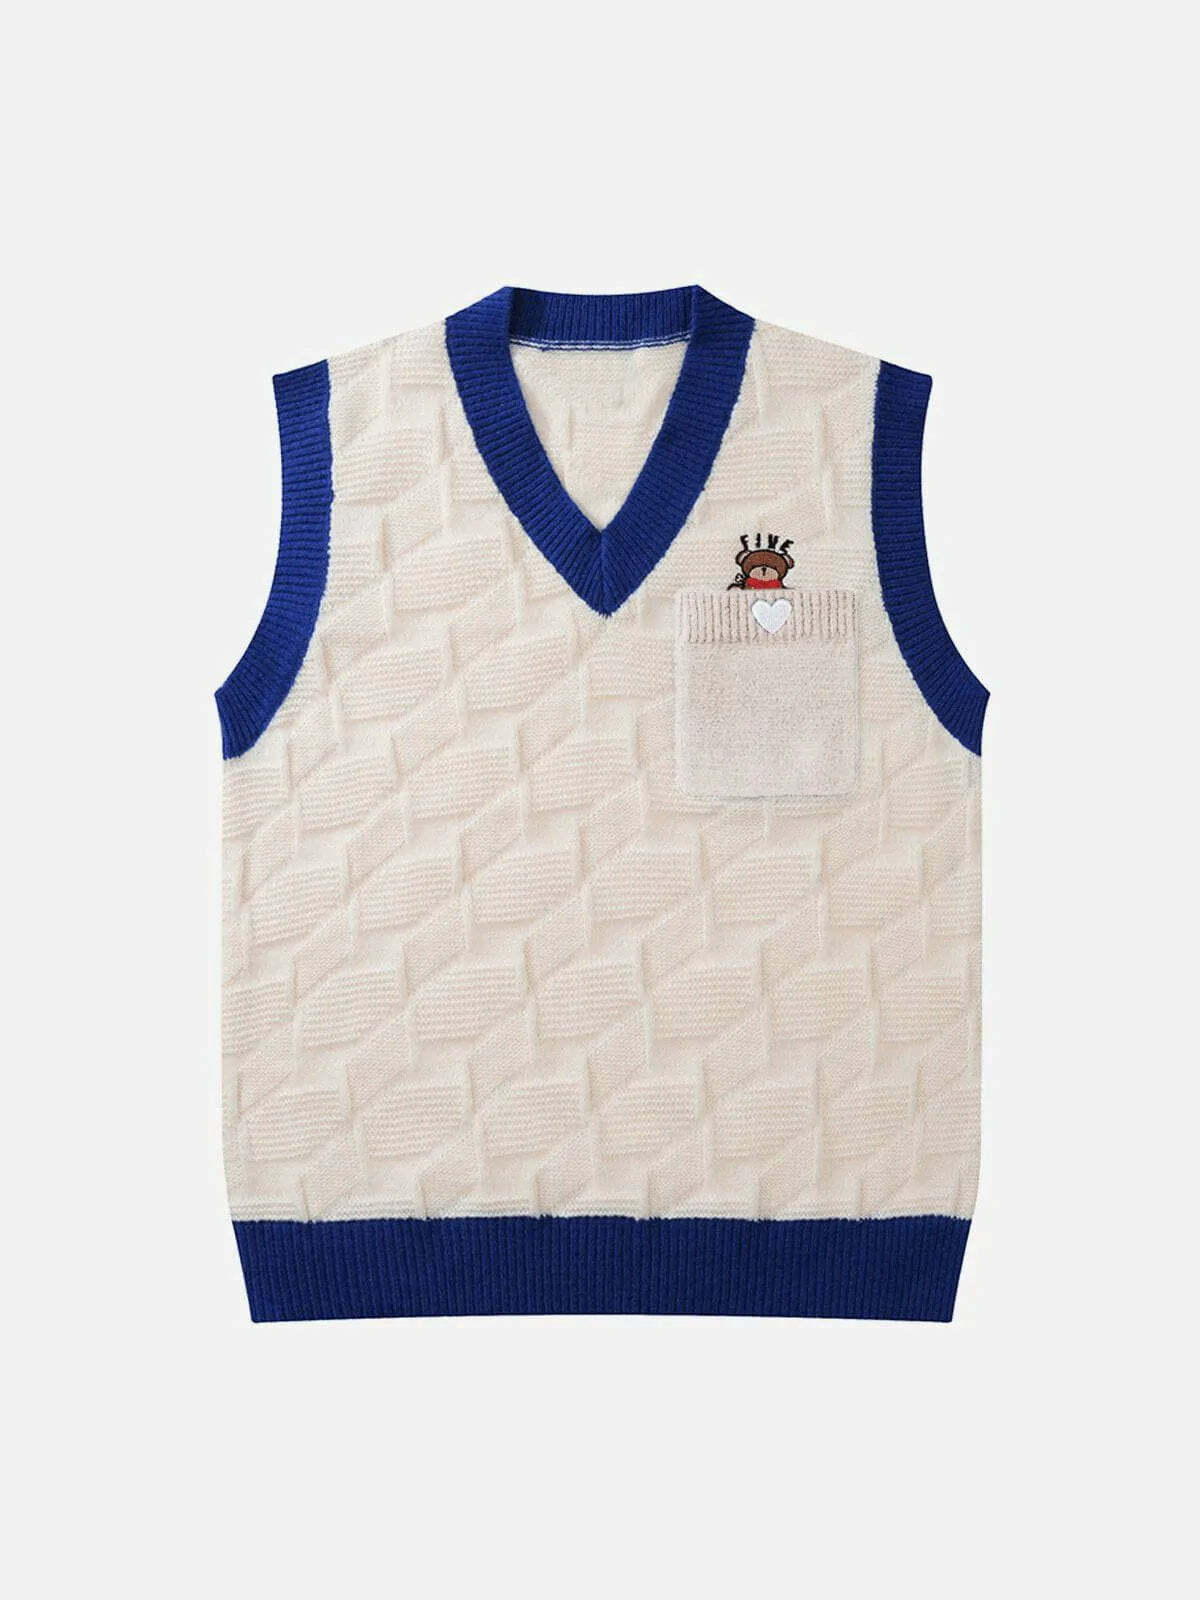 retro bear sweater vest edgy and vibrant y2k streetwear 8122